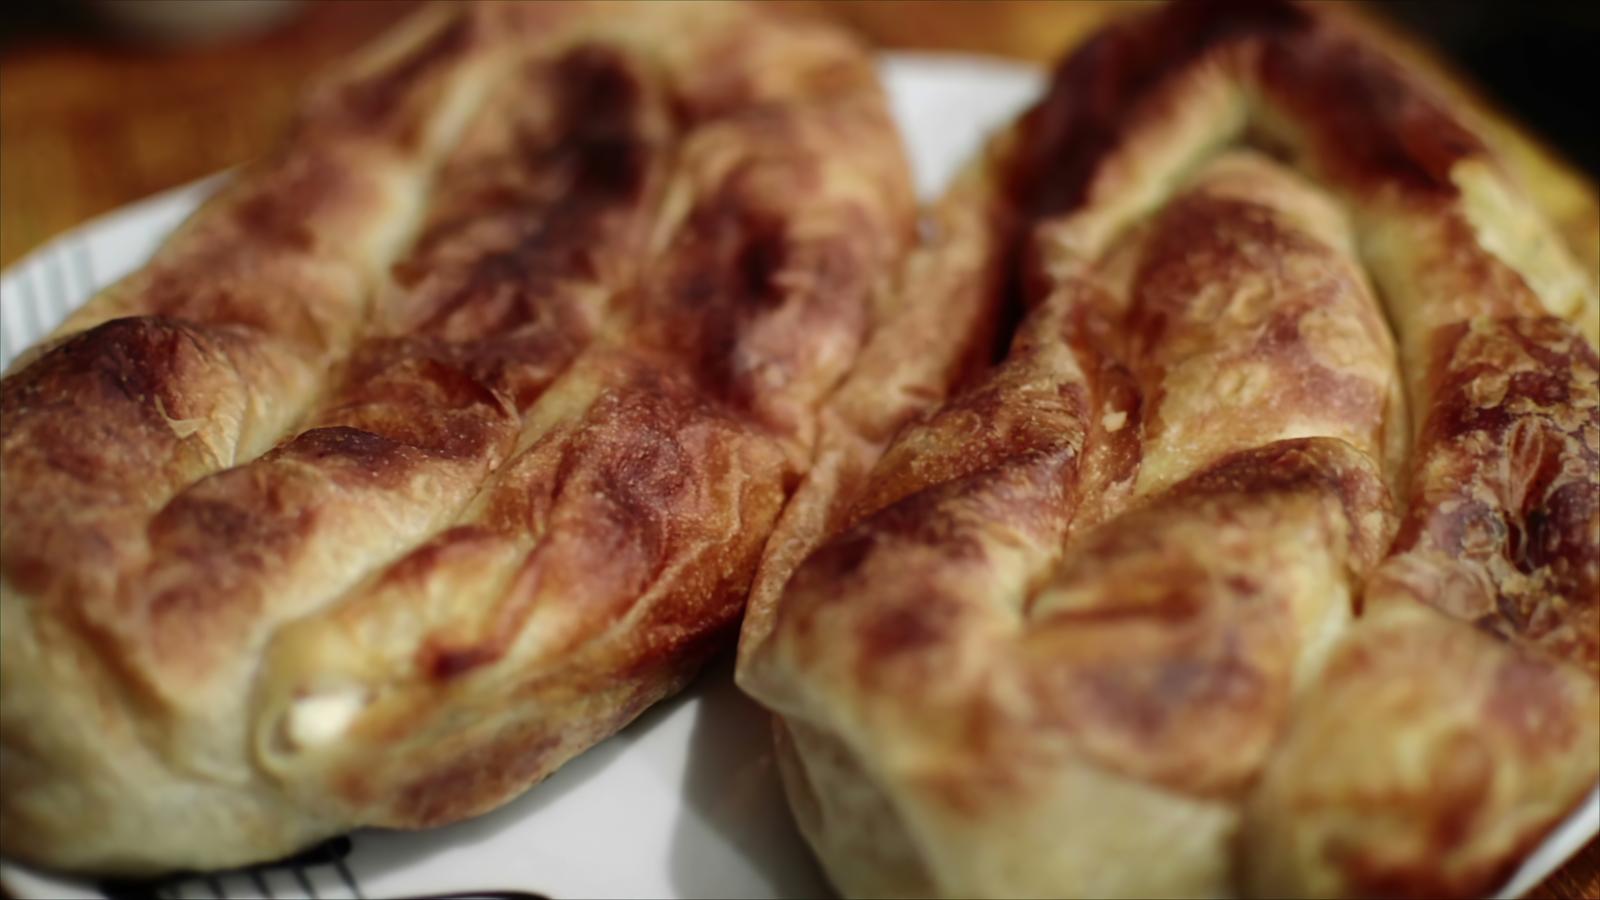 Burek Well Known Fast Food Made From Dough